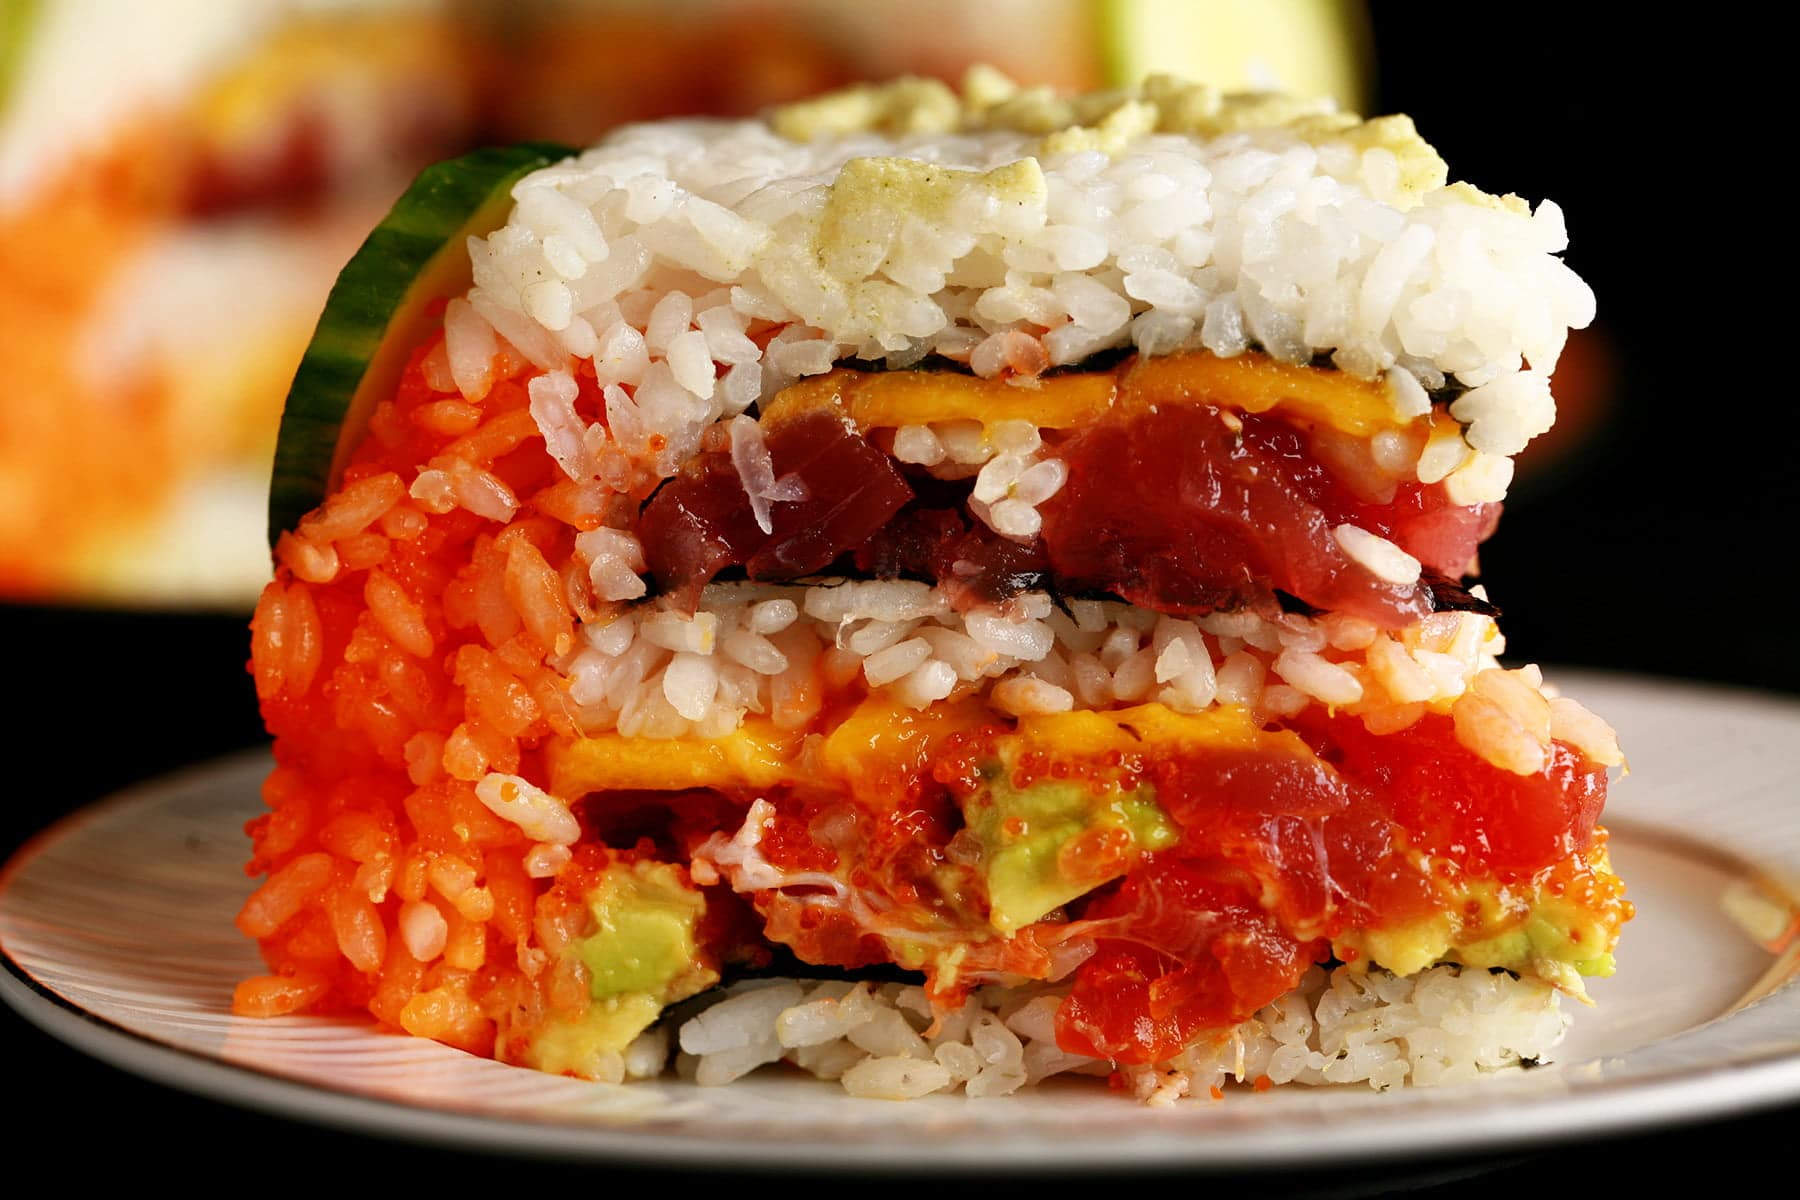 A small sushi cake. Layers of rice and fish in the form of a birthday cake.